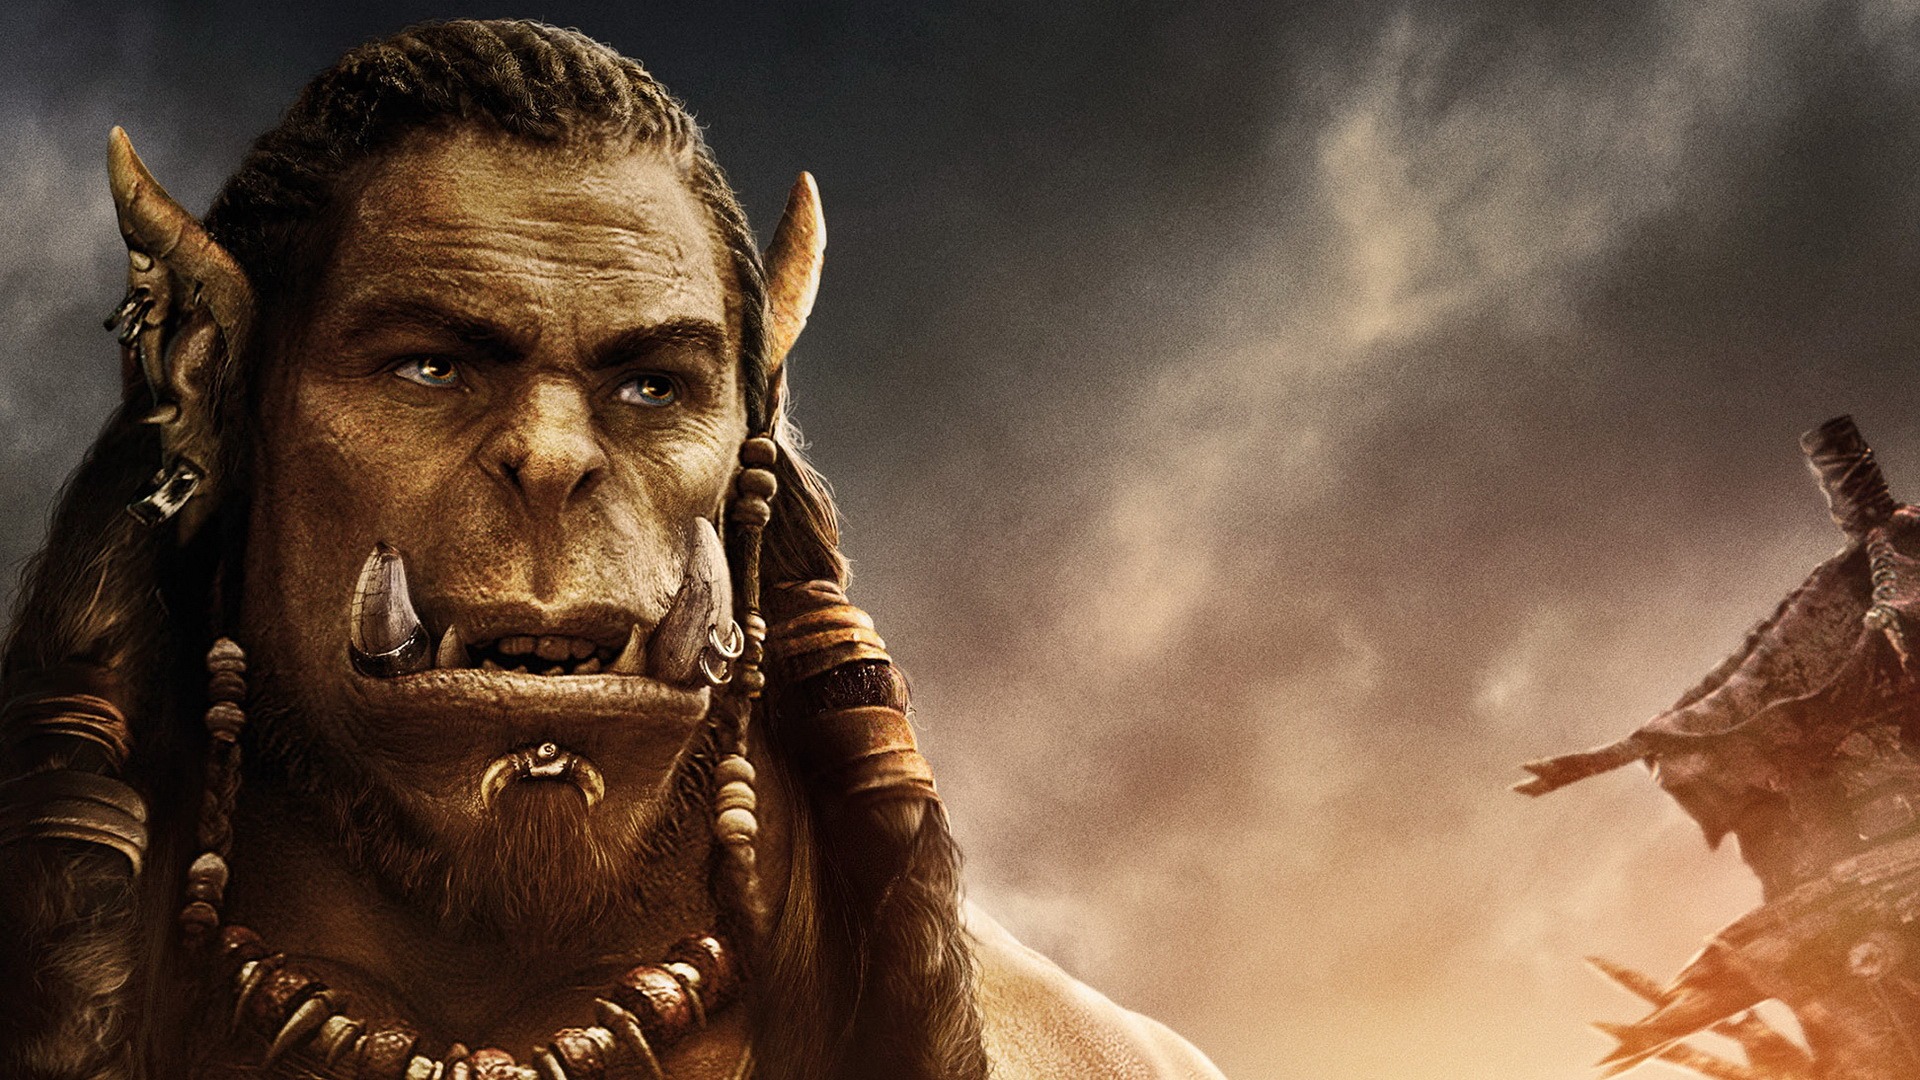 Warcraft, 2016 movie HD wallpapers #13 - 1920x1080